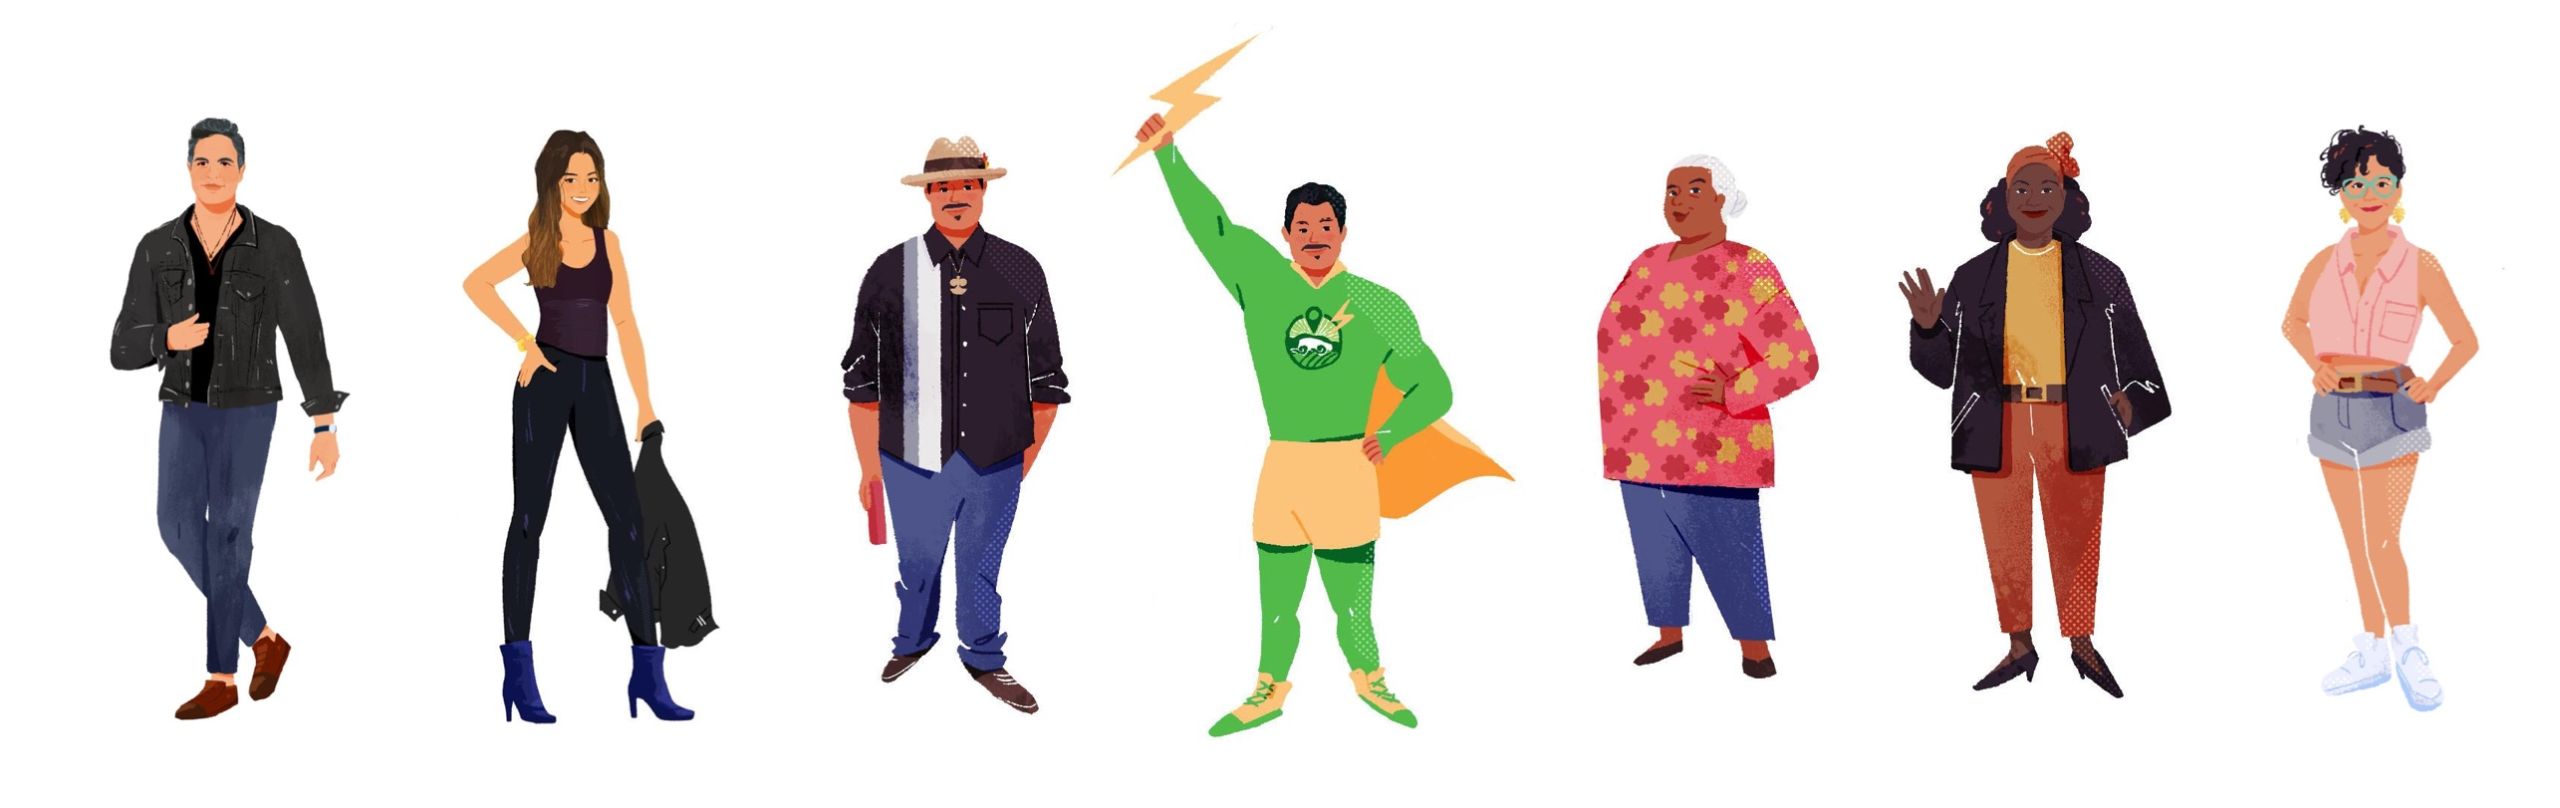 Global and Local Superheroes Illustration